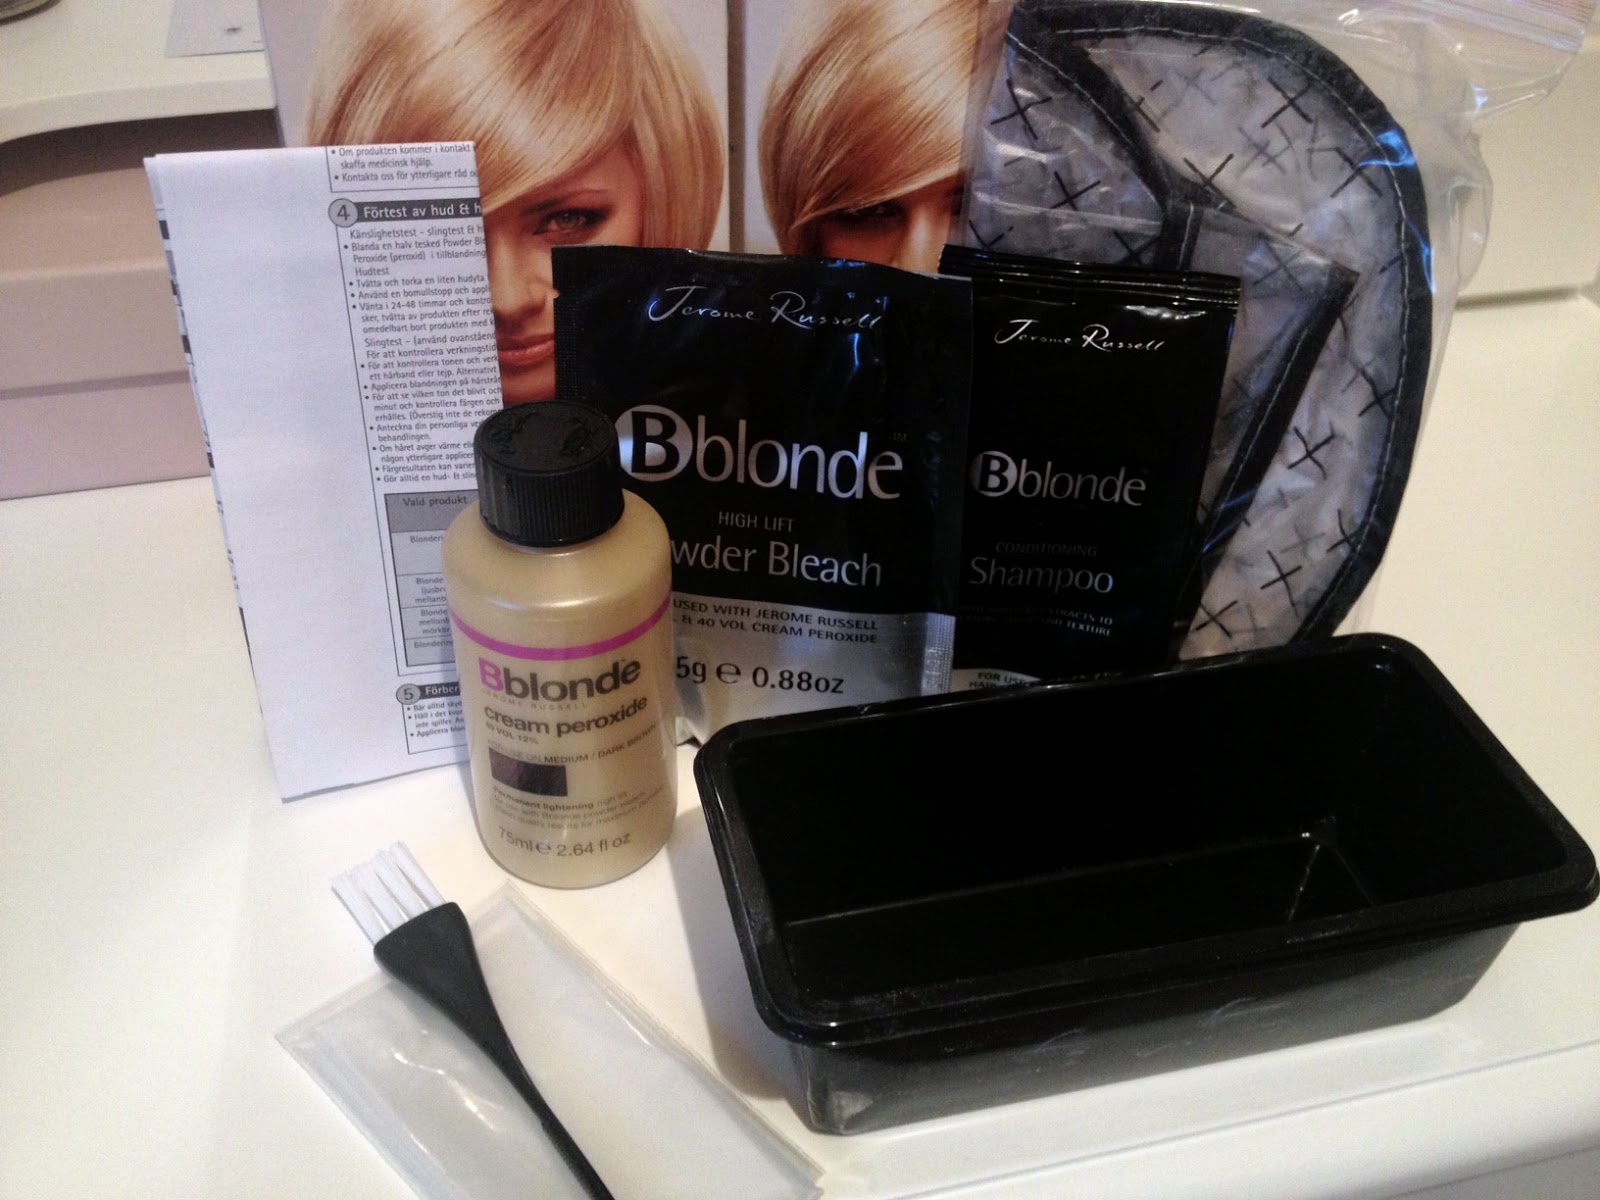 9. Jerome Russell Bblonde Maximum Highlighting Kit - wide 5